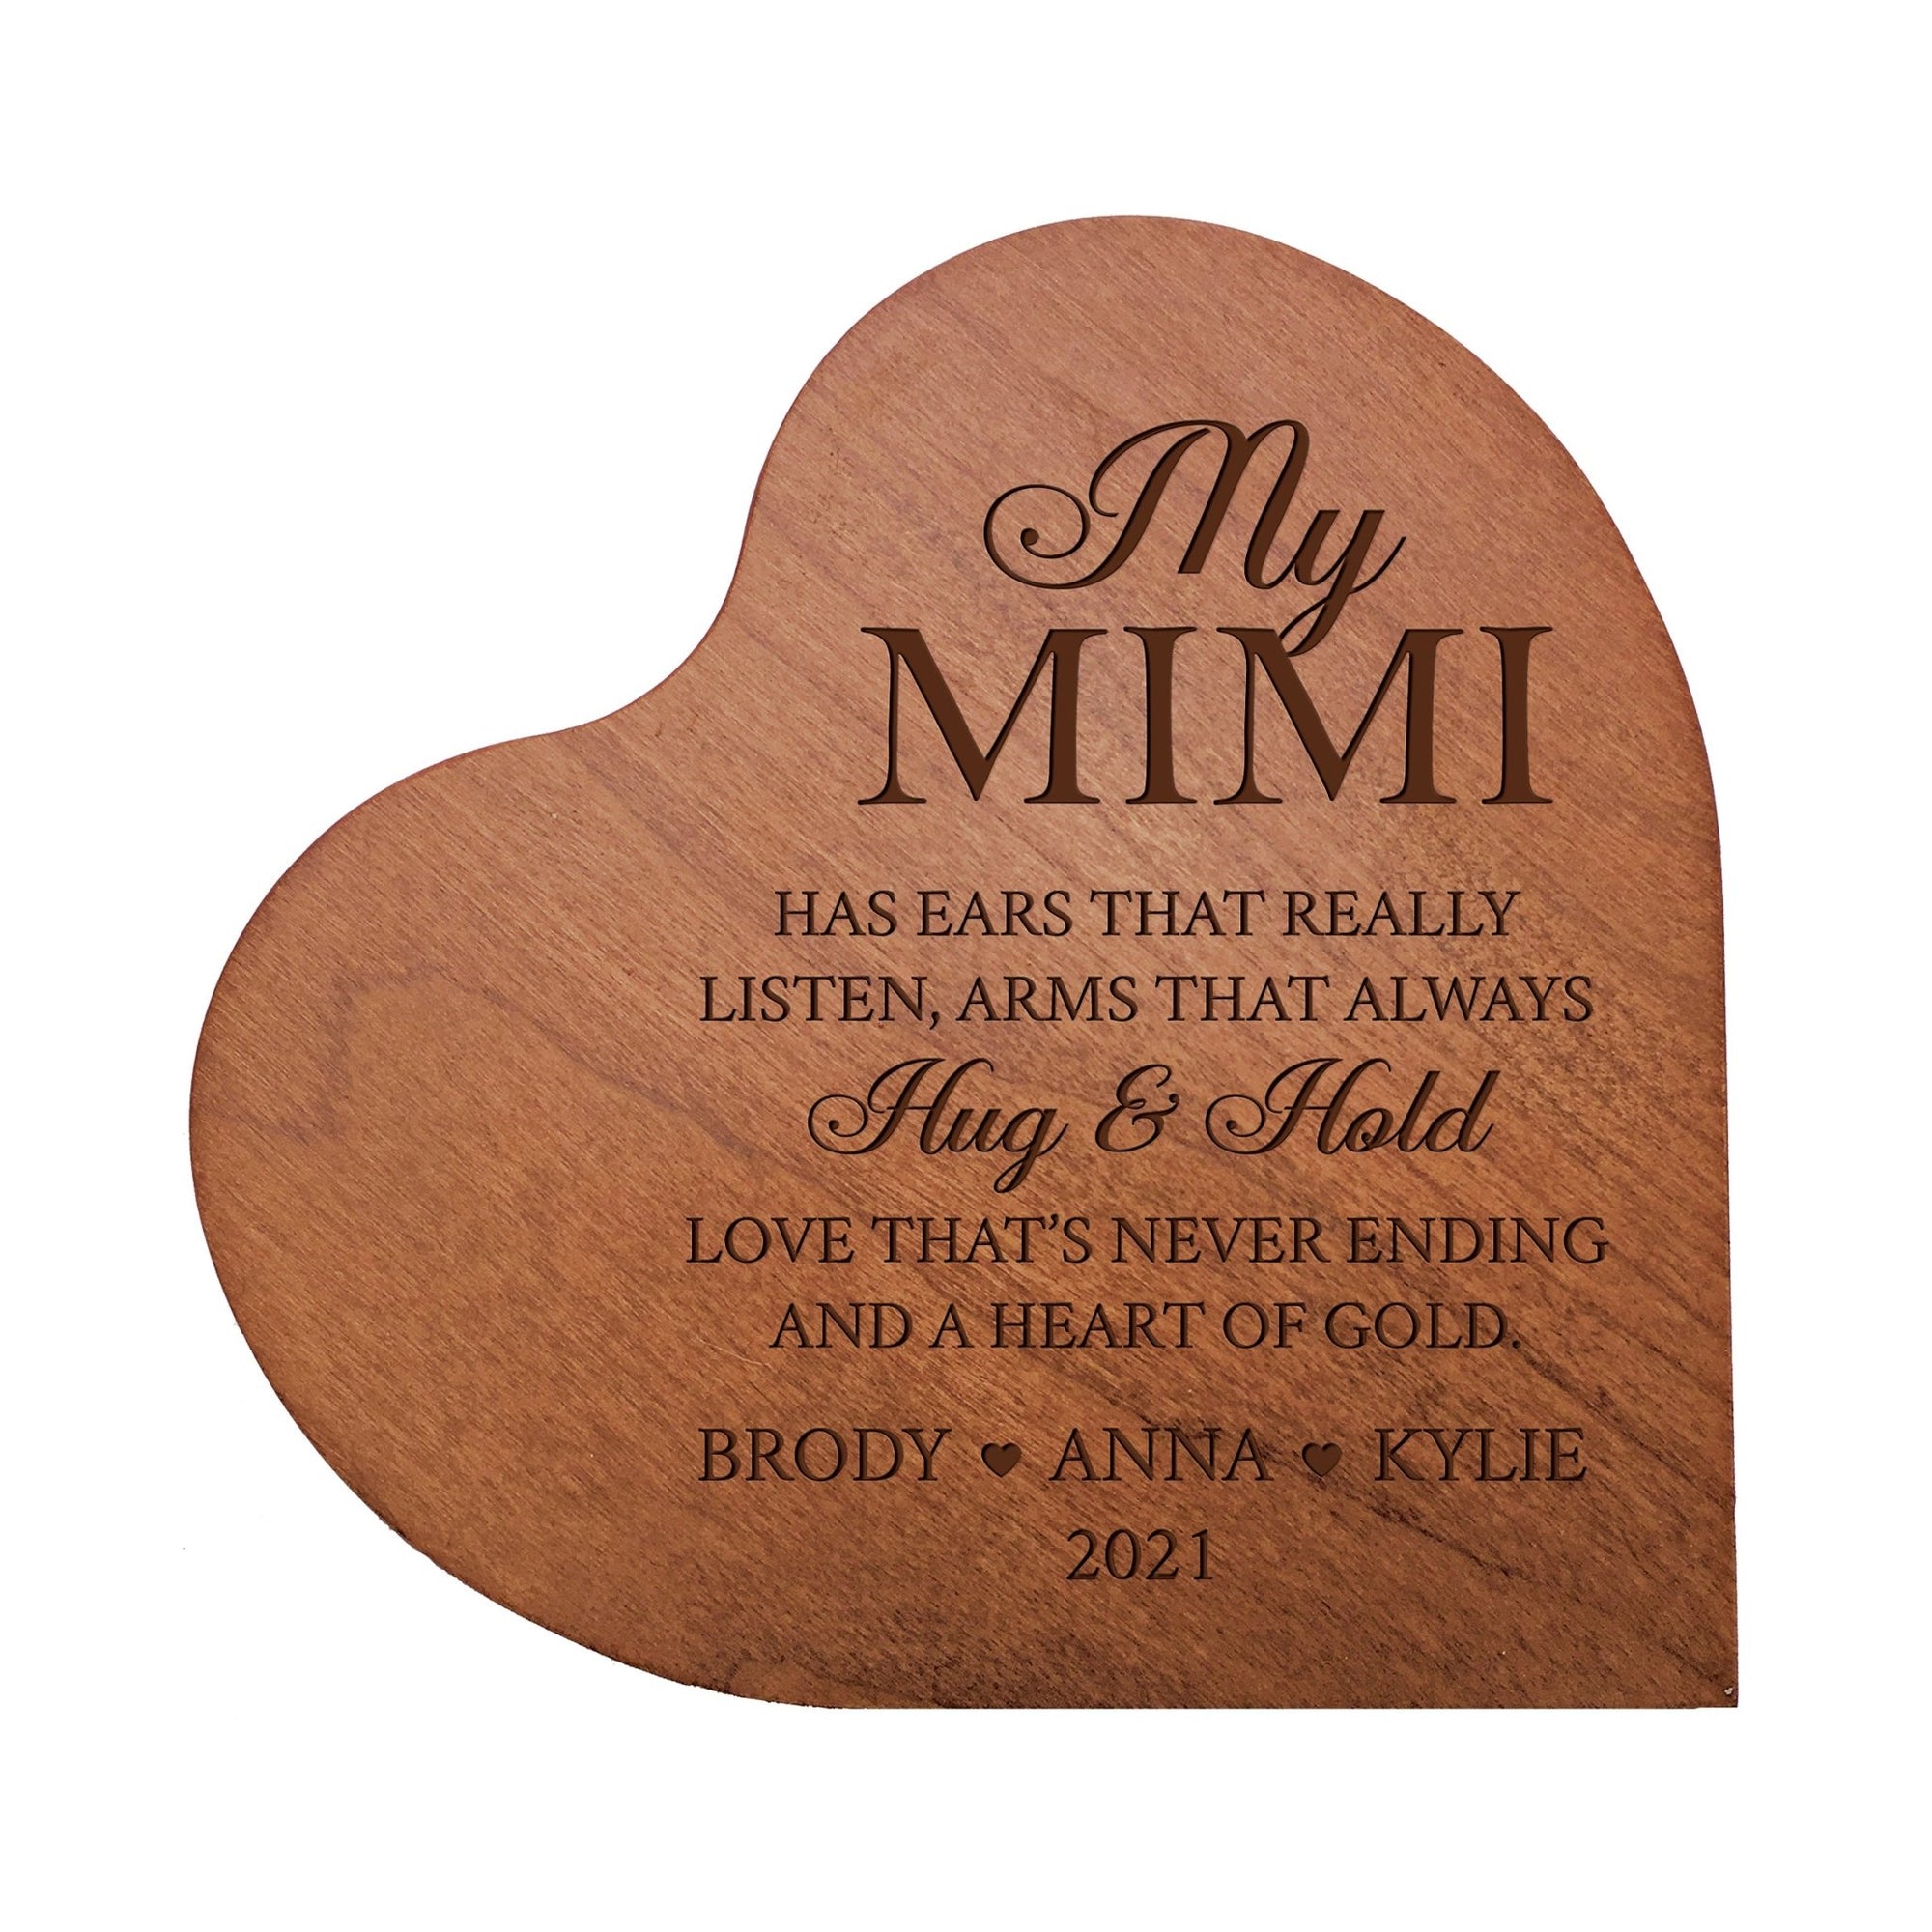 Personalized Modern Mimi’s Love Solid Wood Heart Decoration With Inspirational Verse Keepsake Gift 5x5.25 - Mimi Has Ears That Really = Never Ending - LifeSong Milestones